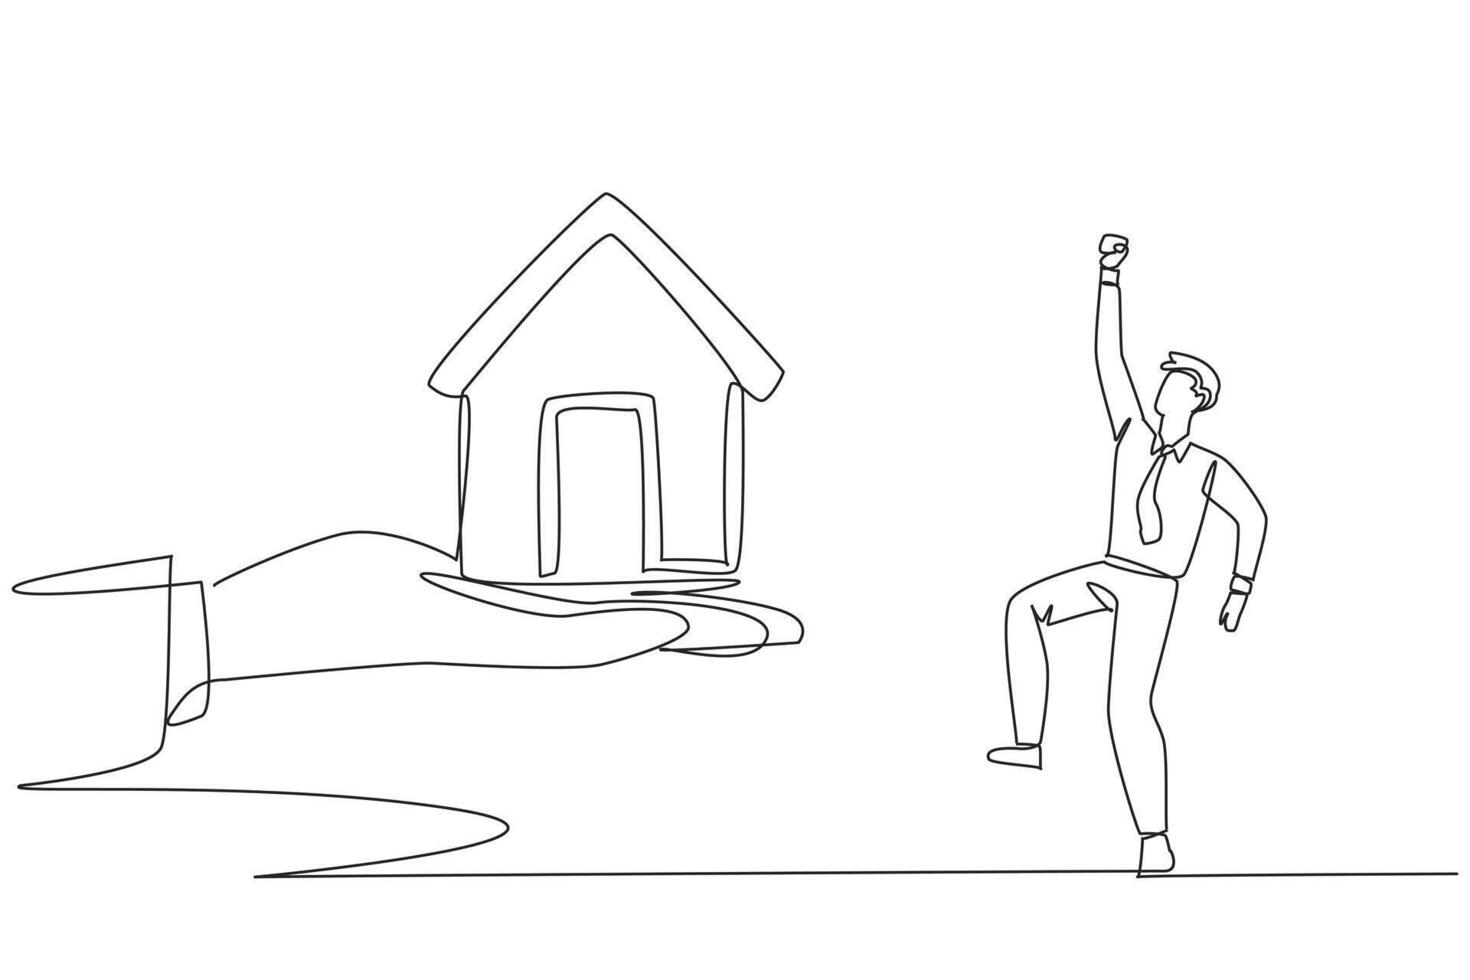 Single continuous line drawing businessman was excited to get a miniature house from the giant hand. Important prize. Proud achievement. Home bonus is a dream. One line design illustration vector